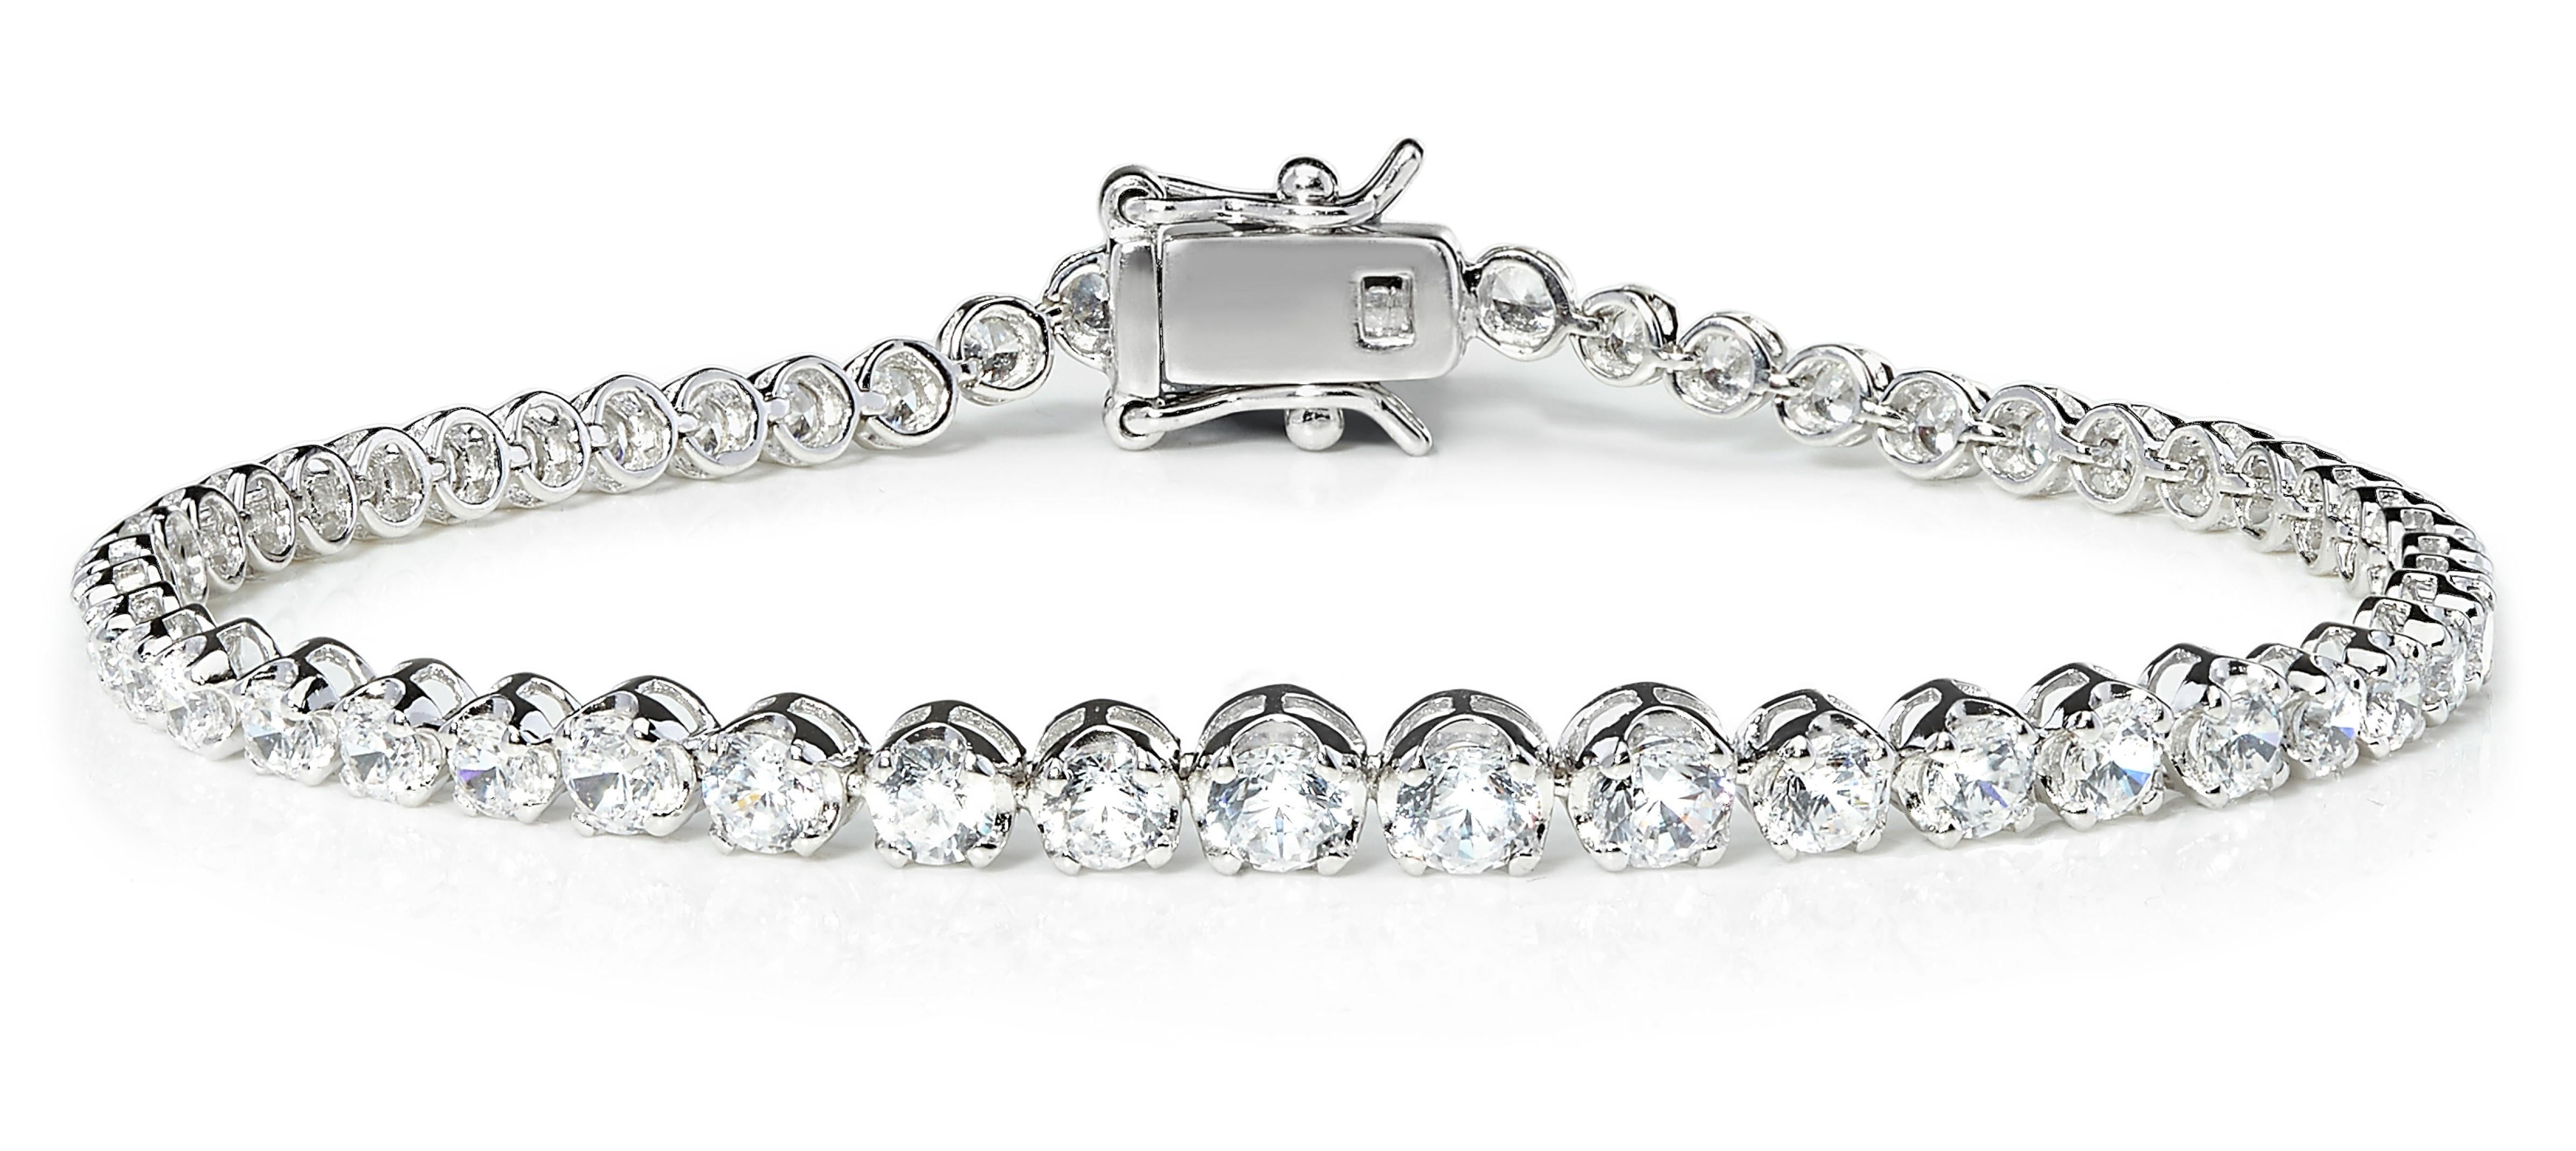 This dazzling claw set graduating round brilliant cut cubic zirconia tennis bracelet is a sparkling addition to any outfit.

Featuring 4.56ct of round brilliant cut cubic zirconia set in 925 sterling silver with a high gloss white rhodium